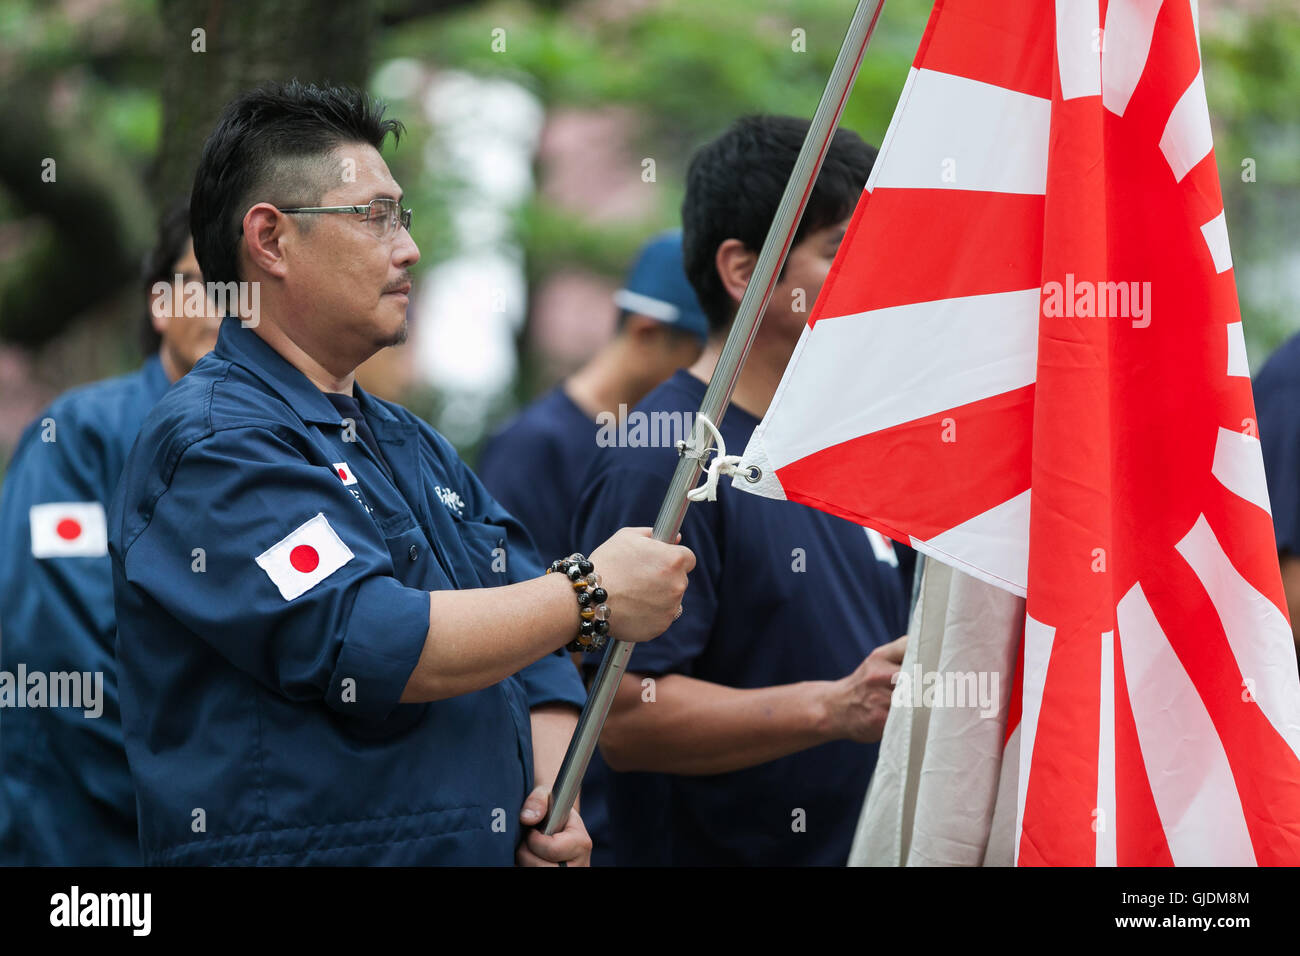 Tokyo, Japan. 15th Aug, 2016. A Japanese nationalist dressed in military uniform holds a war flag of the Imperial Japanese Army to pay his respects to the war dead at Yasukuni Shrine on the 71st anniversary of Japan's surrender in World War II on August 15, 2016, Tokyo, Japan. Some 70 lawmakers visited the Shrine to pay their respects, but the Prime Minister Shinzo Abe did not visit the controversial symbol and instead sent a ritual offering to a shrine. Credit:  Aflo Co. Ltd./Alamy Live News Stock Photo